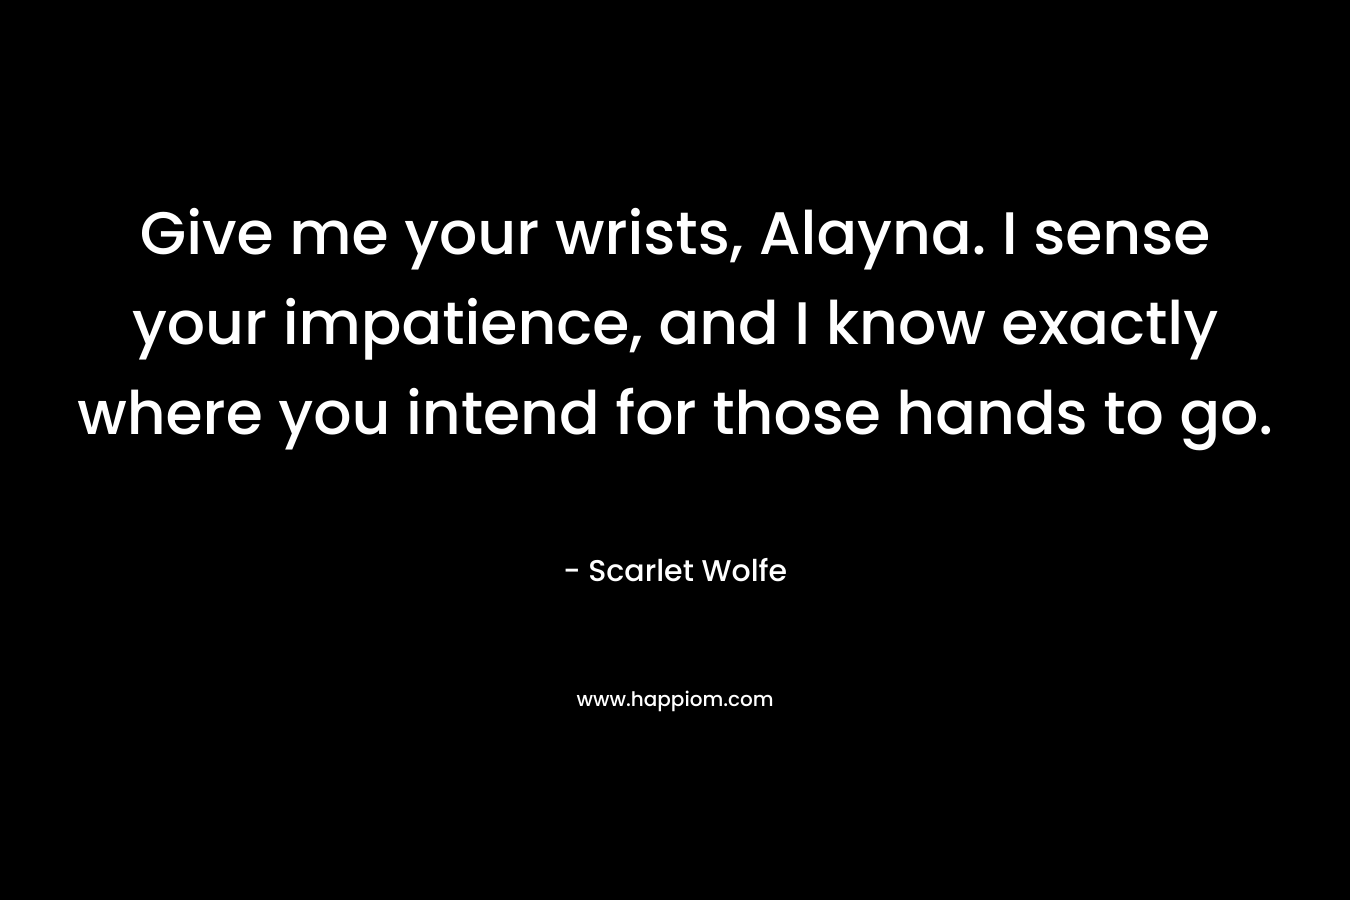 Give me your wrists, Alayna. I sense your impatience, and I know exactly where you intend for those hands to go. – Scarlet Wolfe